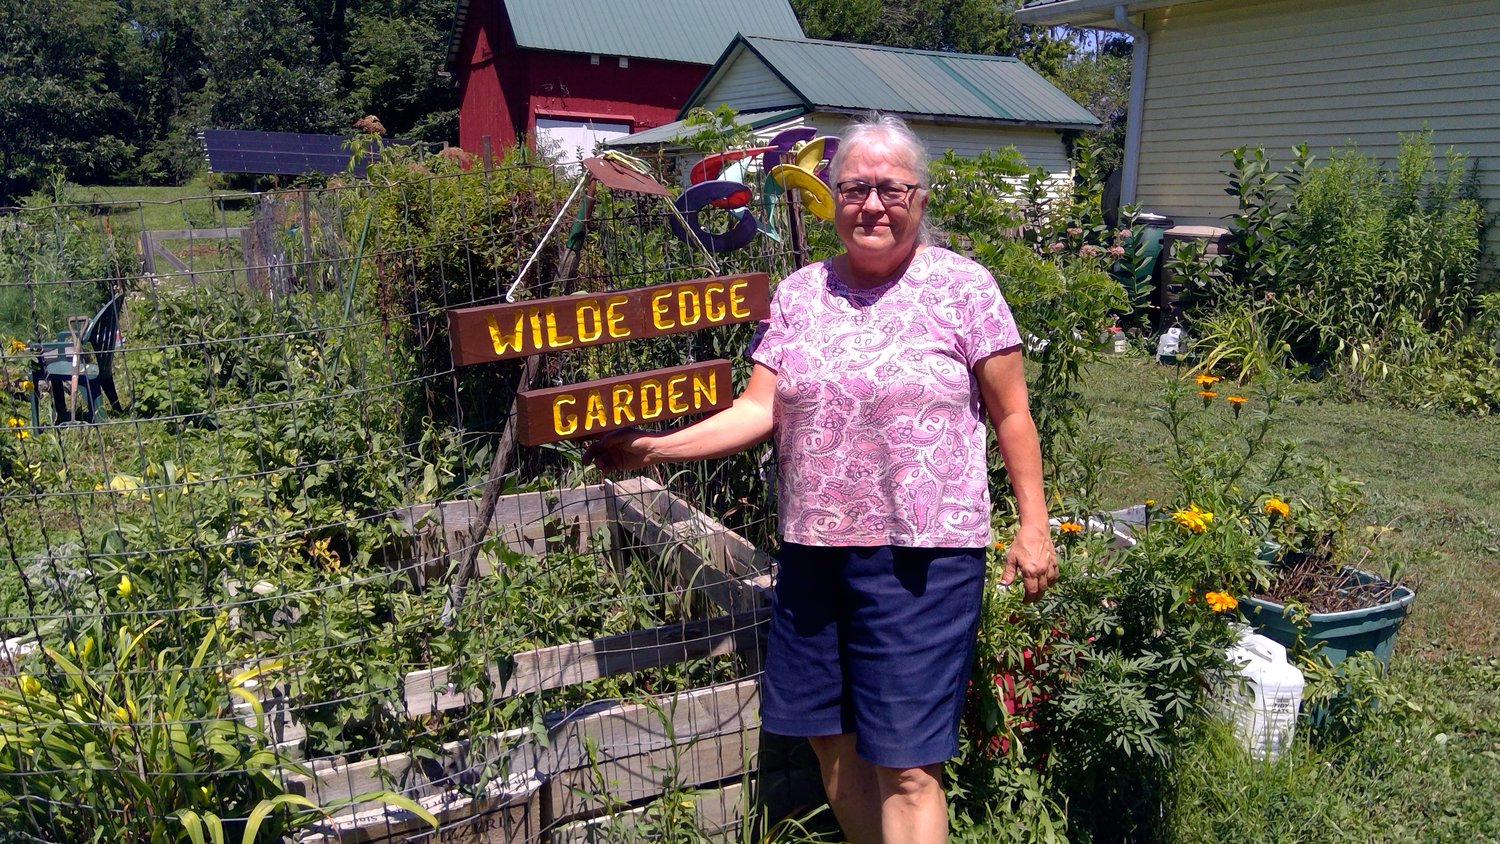 Dianne Combs has been gardening since she was a child.